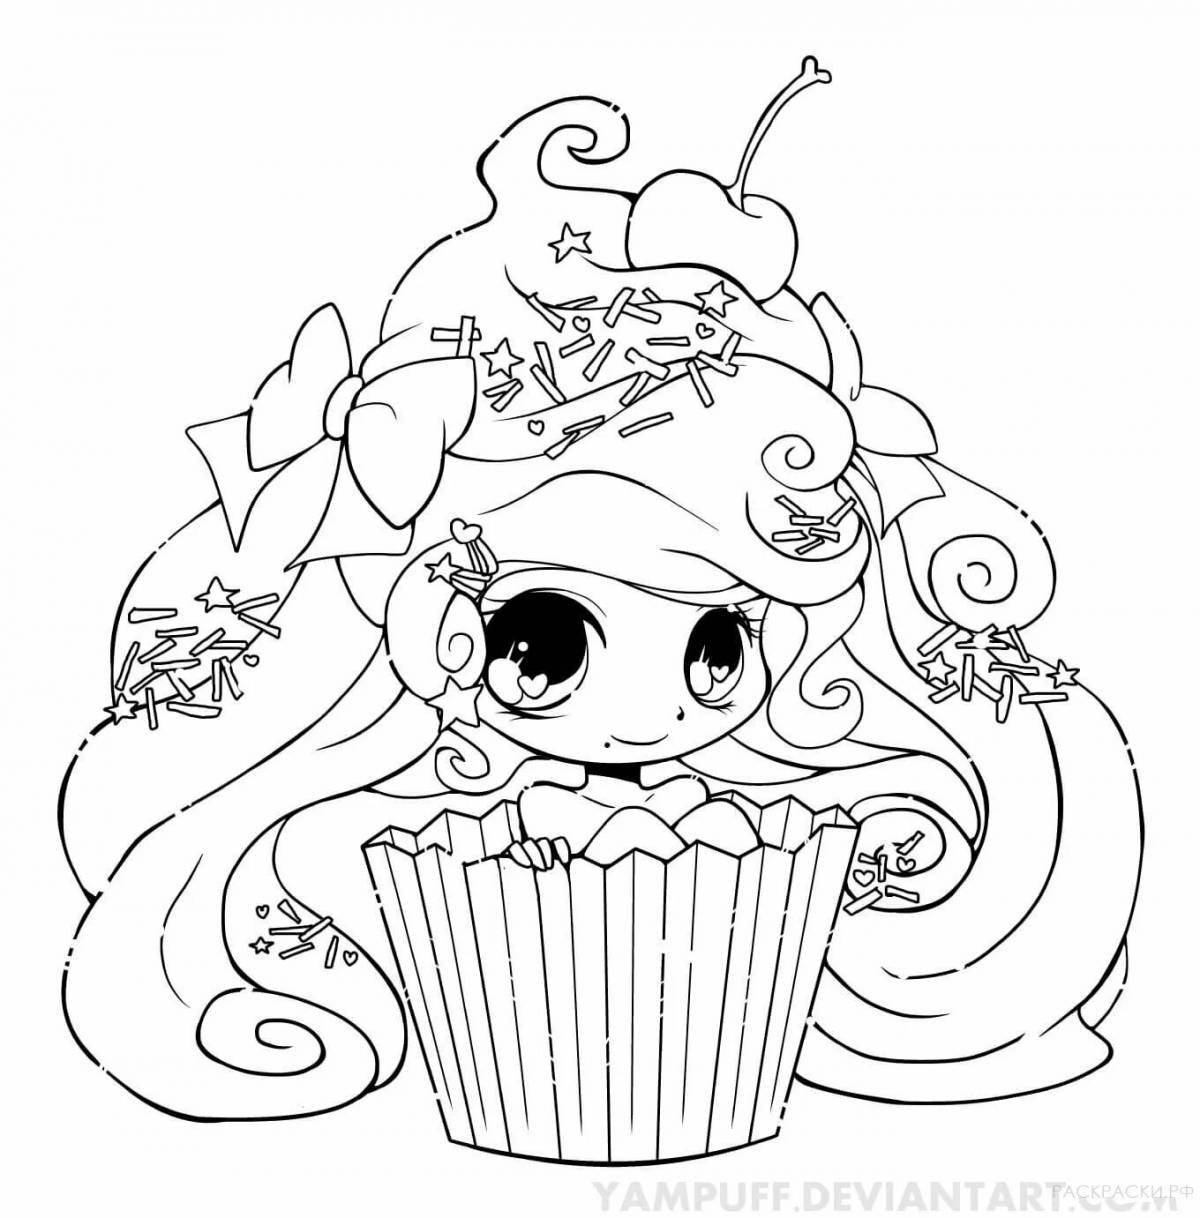 Cute kawaii girls coloring pages